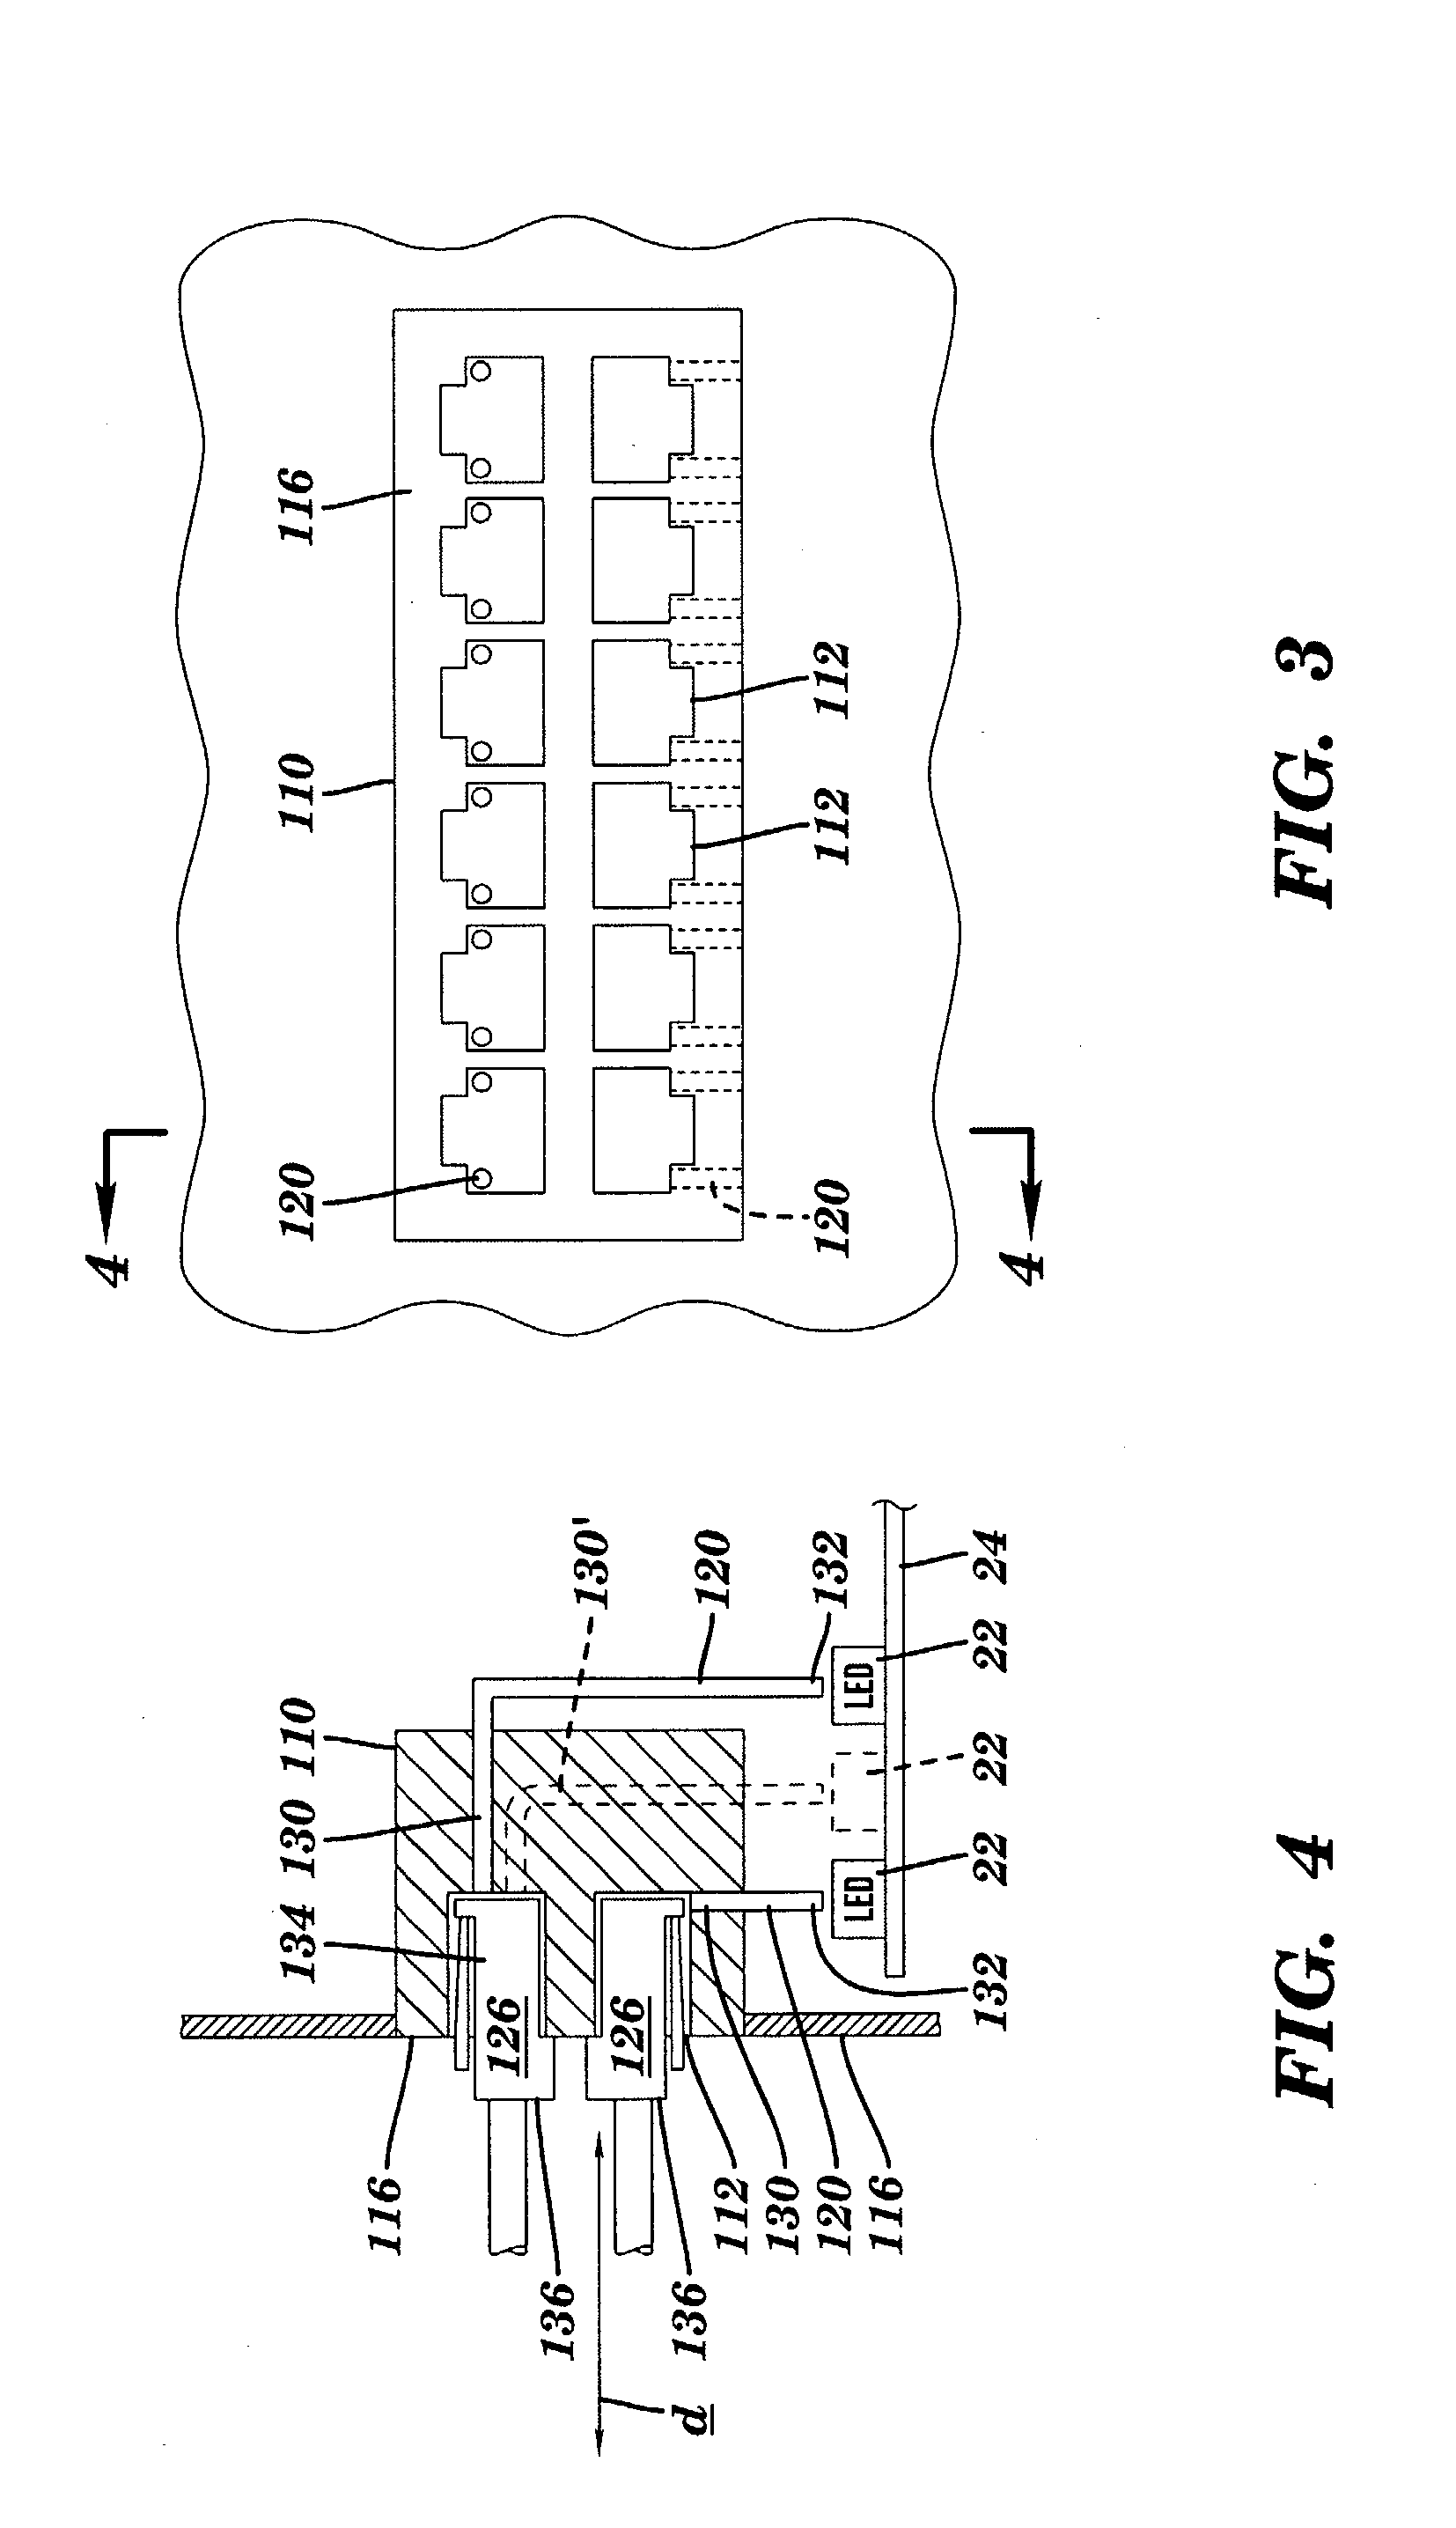 Modular receptacle assembly and interface with integral optical indication